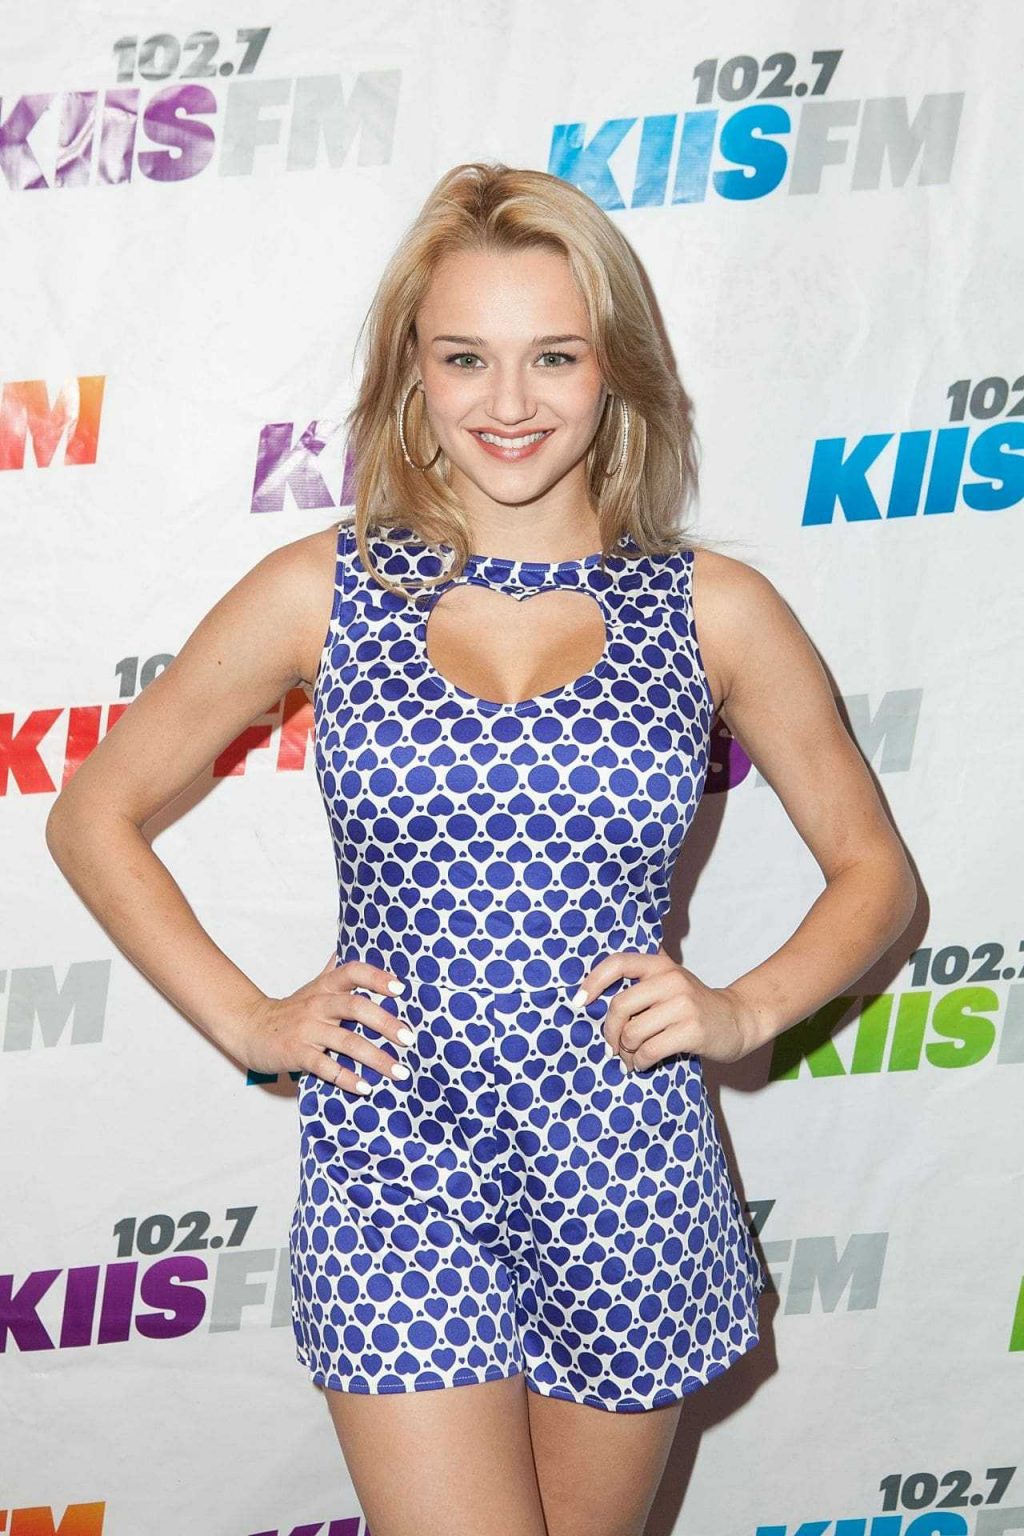 51 Hunter King Nude Pictures Display Her As A Skilled Performer 103